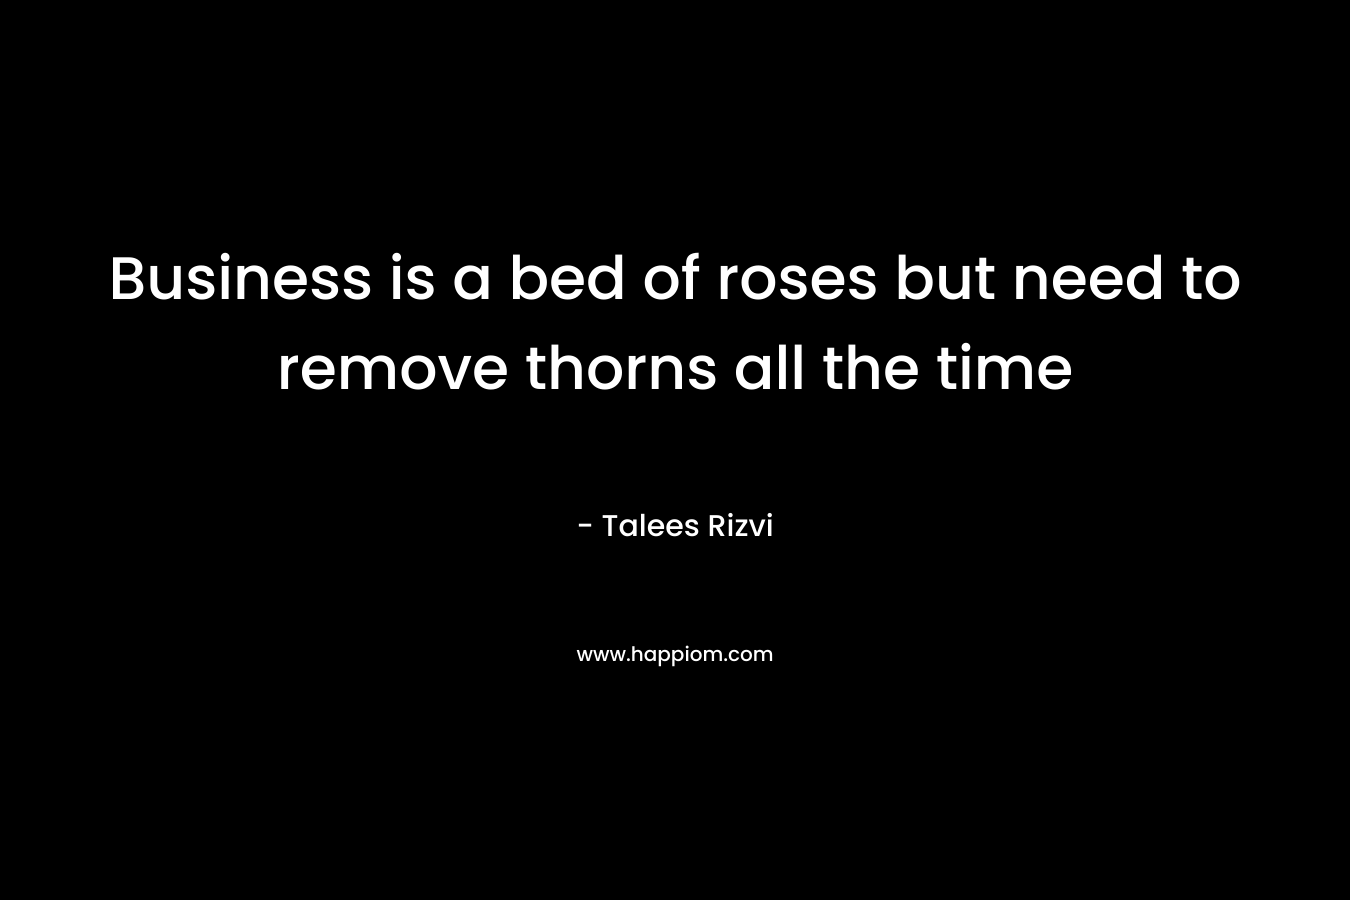 Business is a bed of roses but need to remove thorns all the time – Talees Rizvi